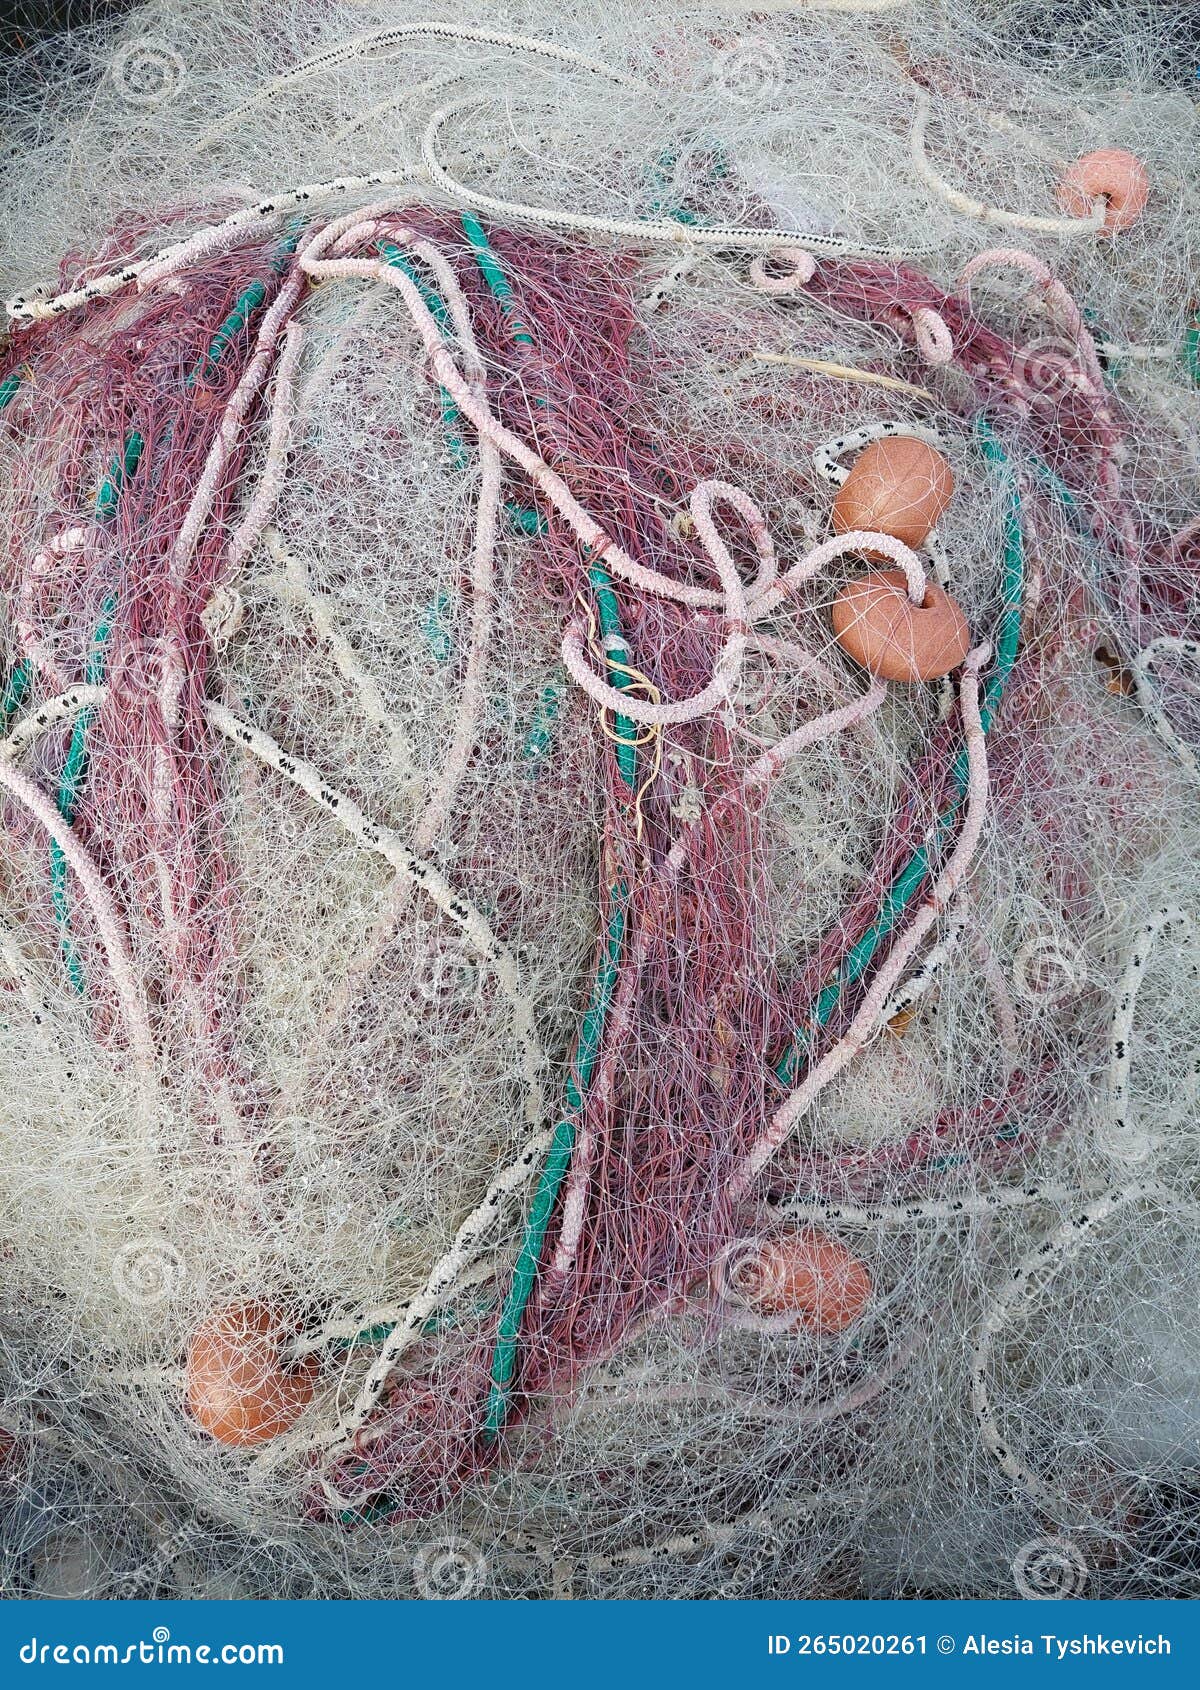 Colorful Fishing Nets and Floats Stock Image - Image of circle